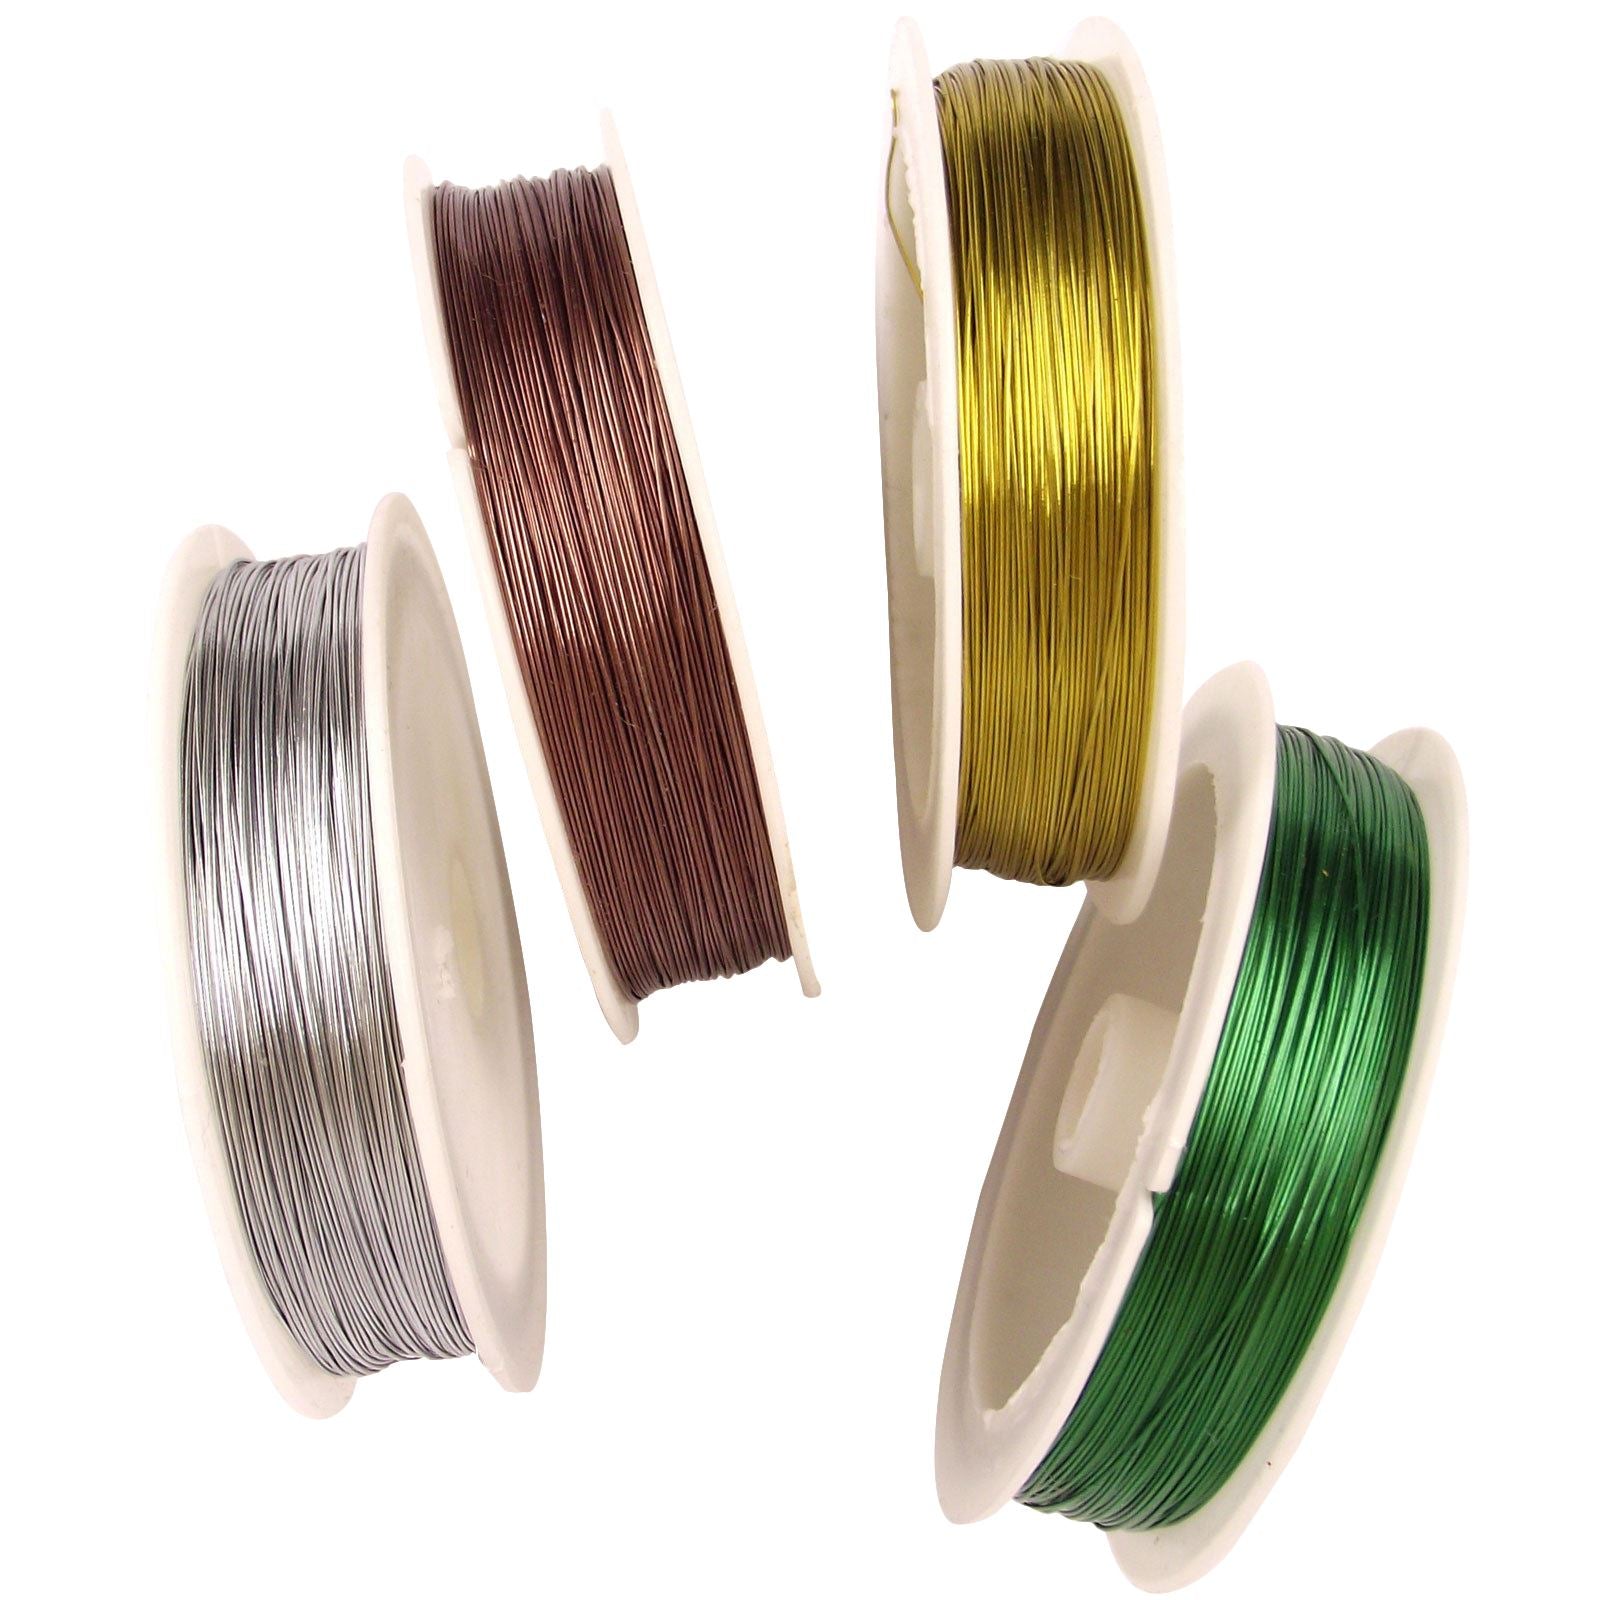 4x Rolls of Tiger Tail Binding Wire